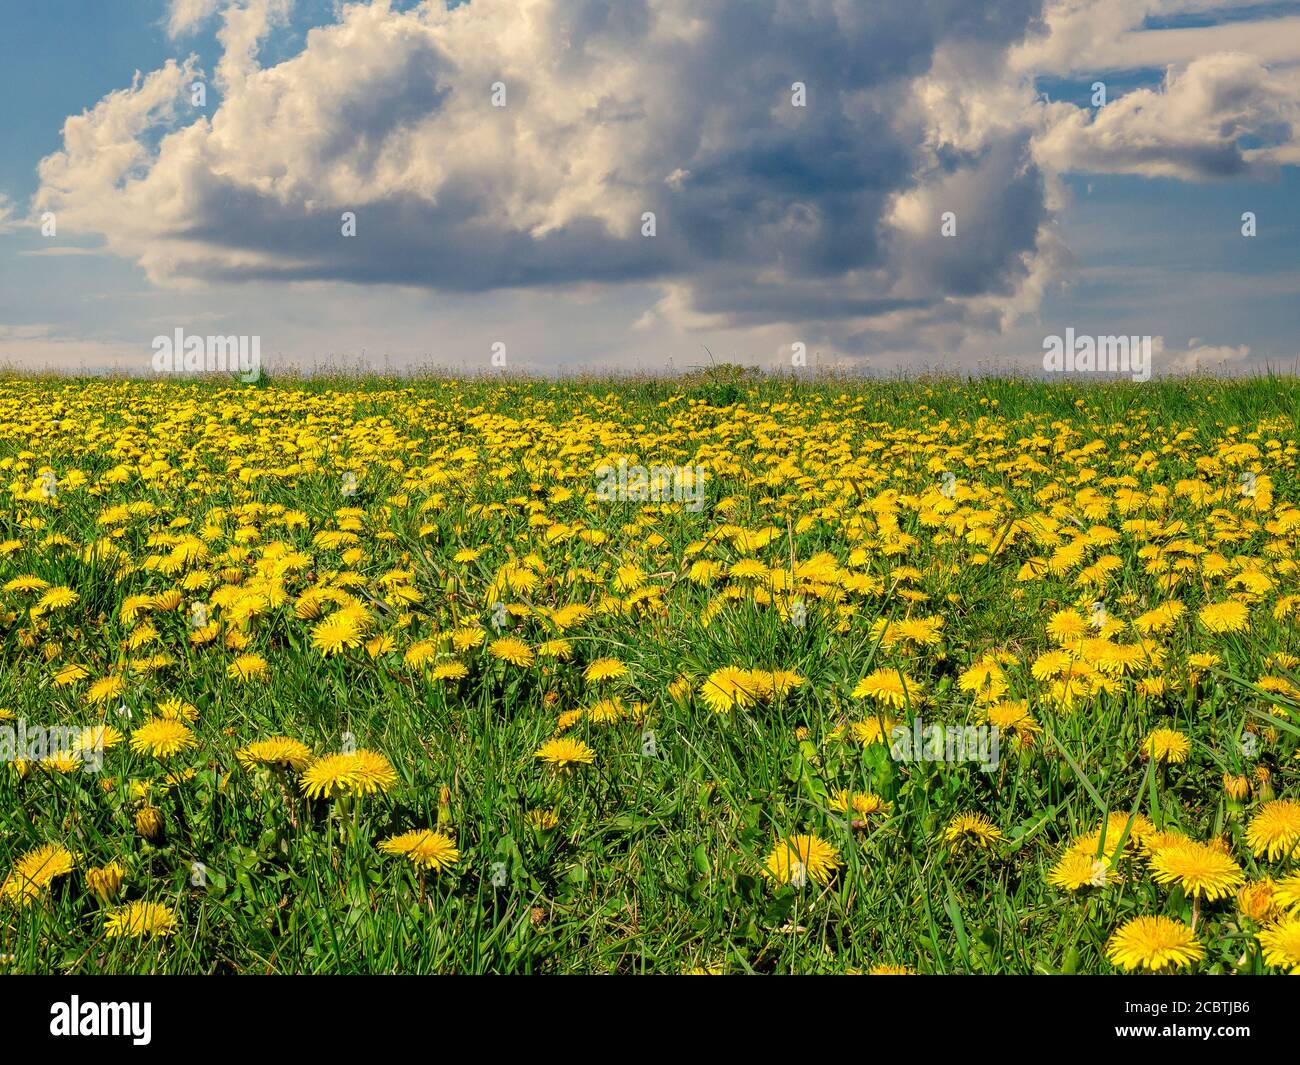 Spring meadow full of blooming dandelions (Taraxacum officinale) under blue sky with big cloud Stock Photo